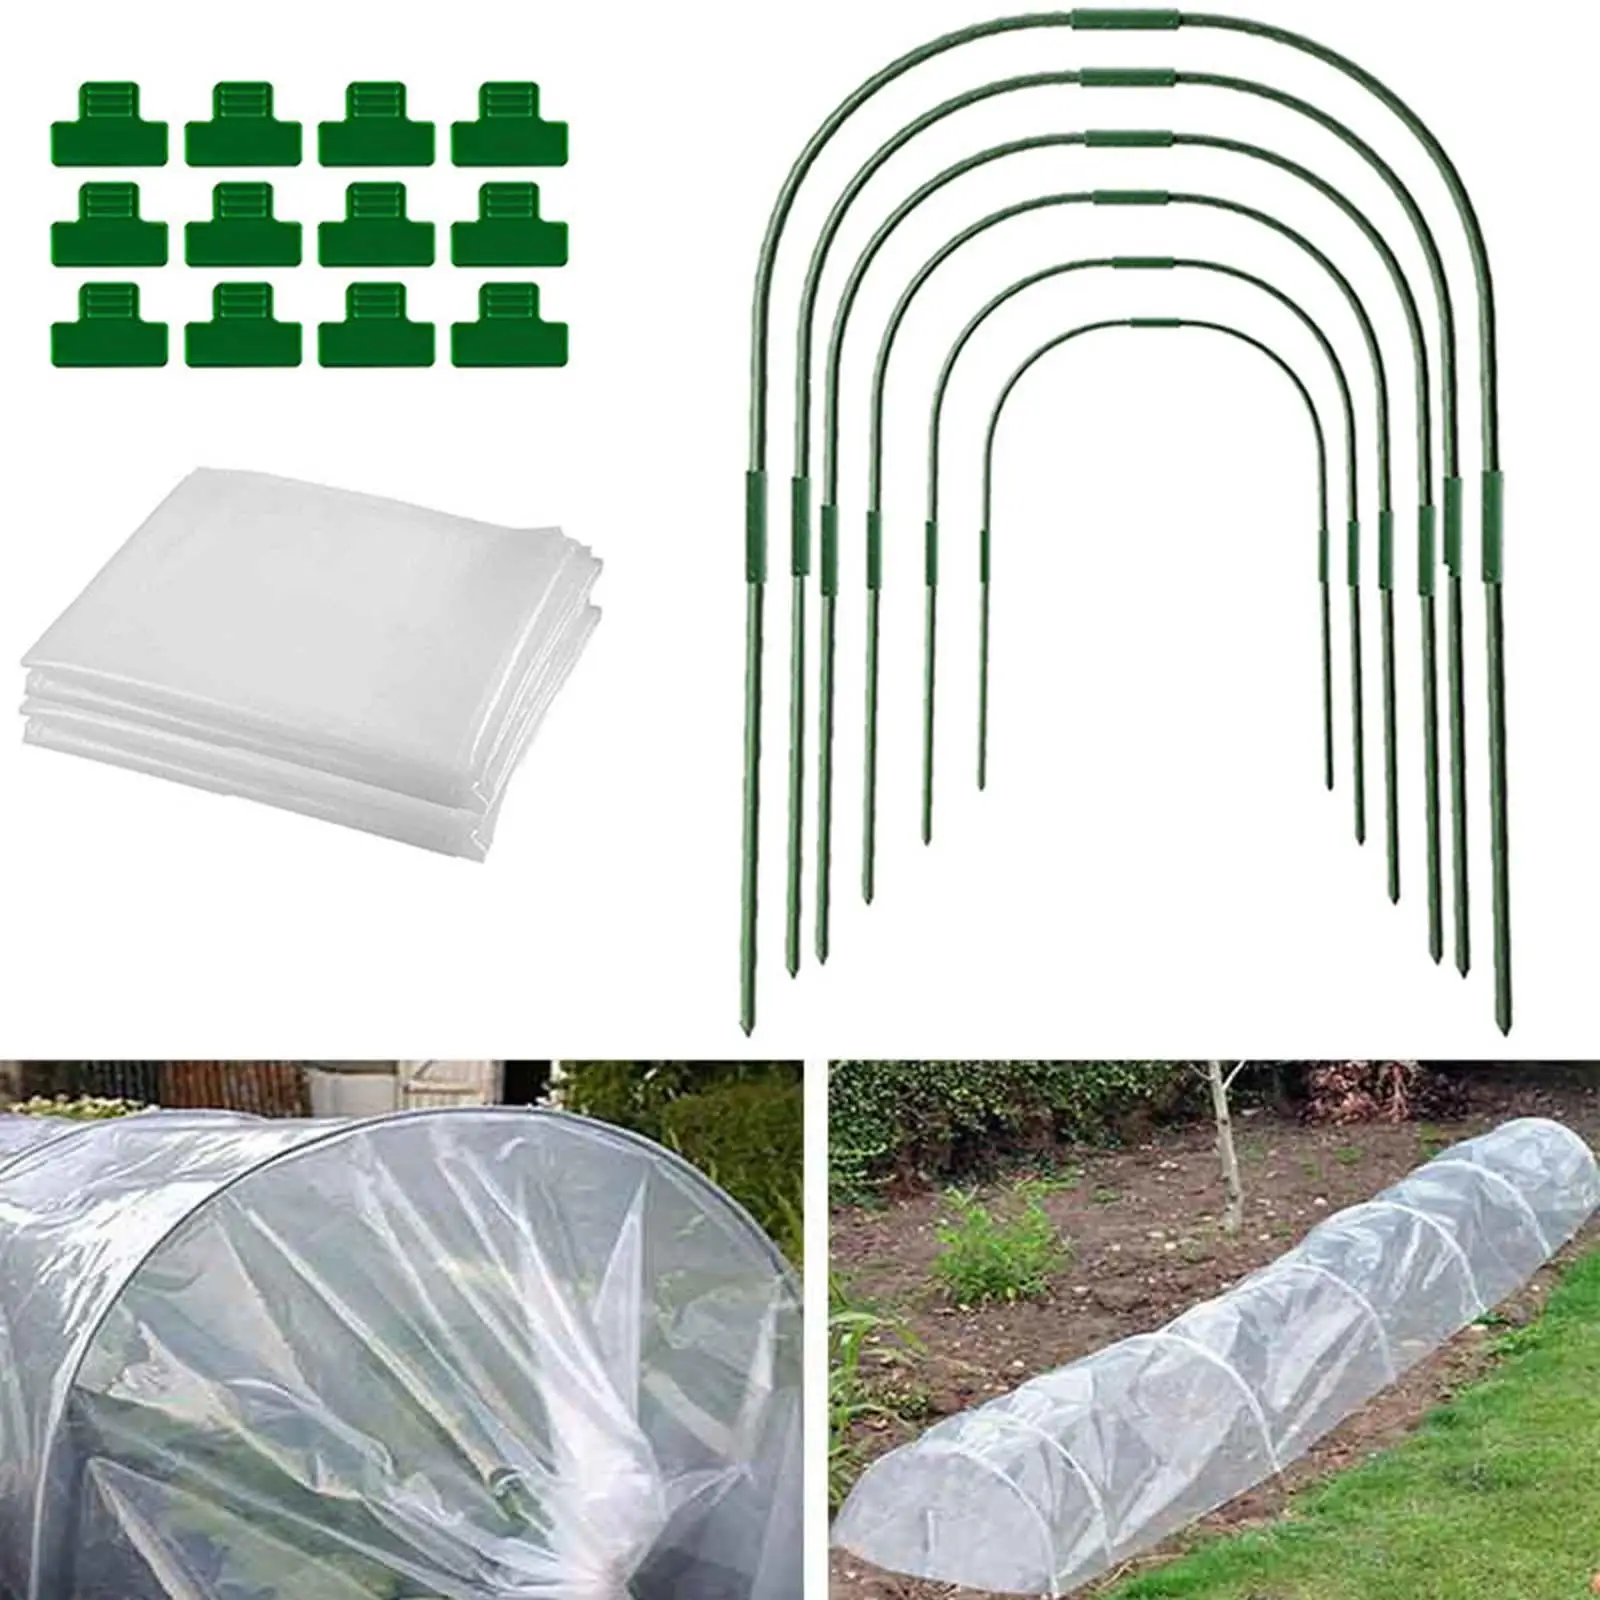 Planter Support Stakes Greenhouse Clamp Netting Tunnel Hoop Clip Frame Planter Support Grow Tunnel Greenhouse Hoop Kits Frame